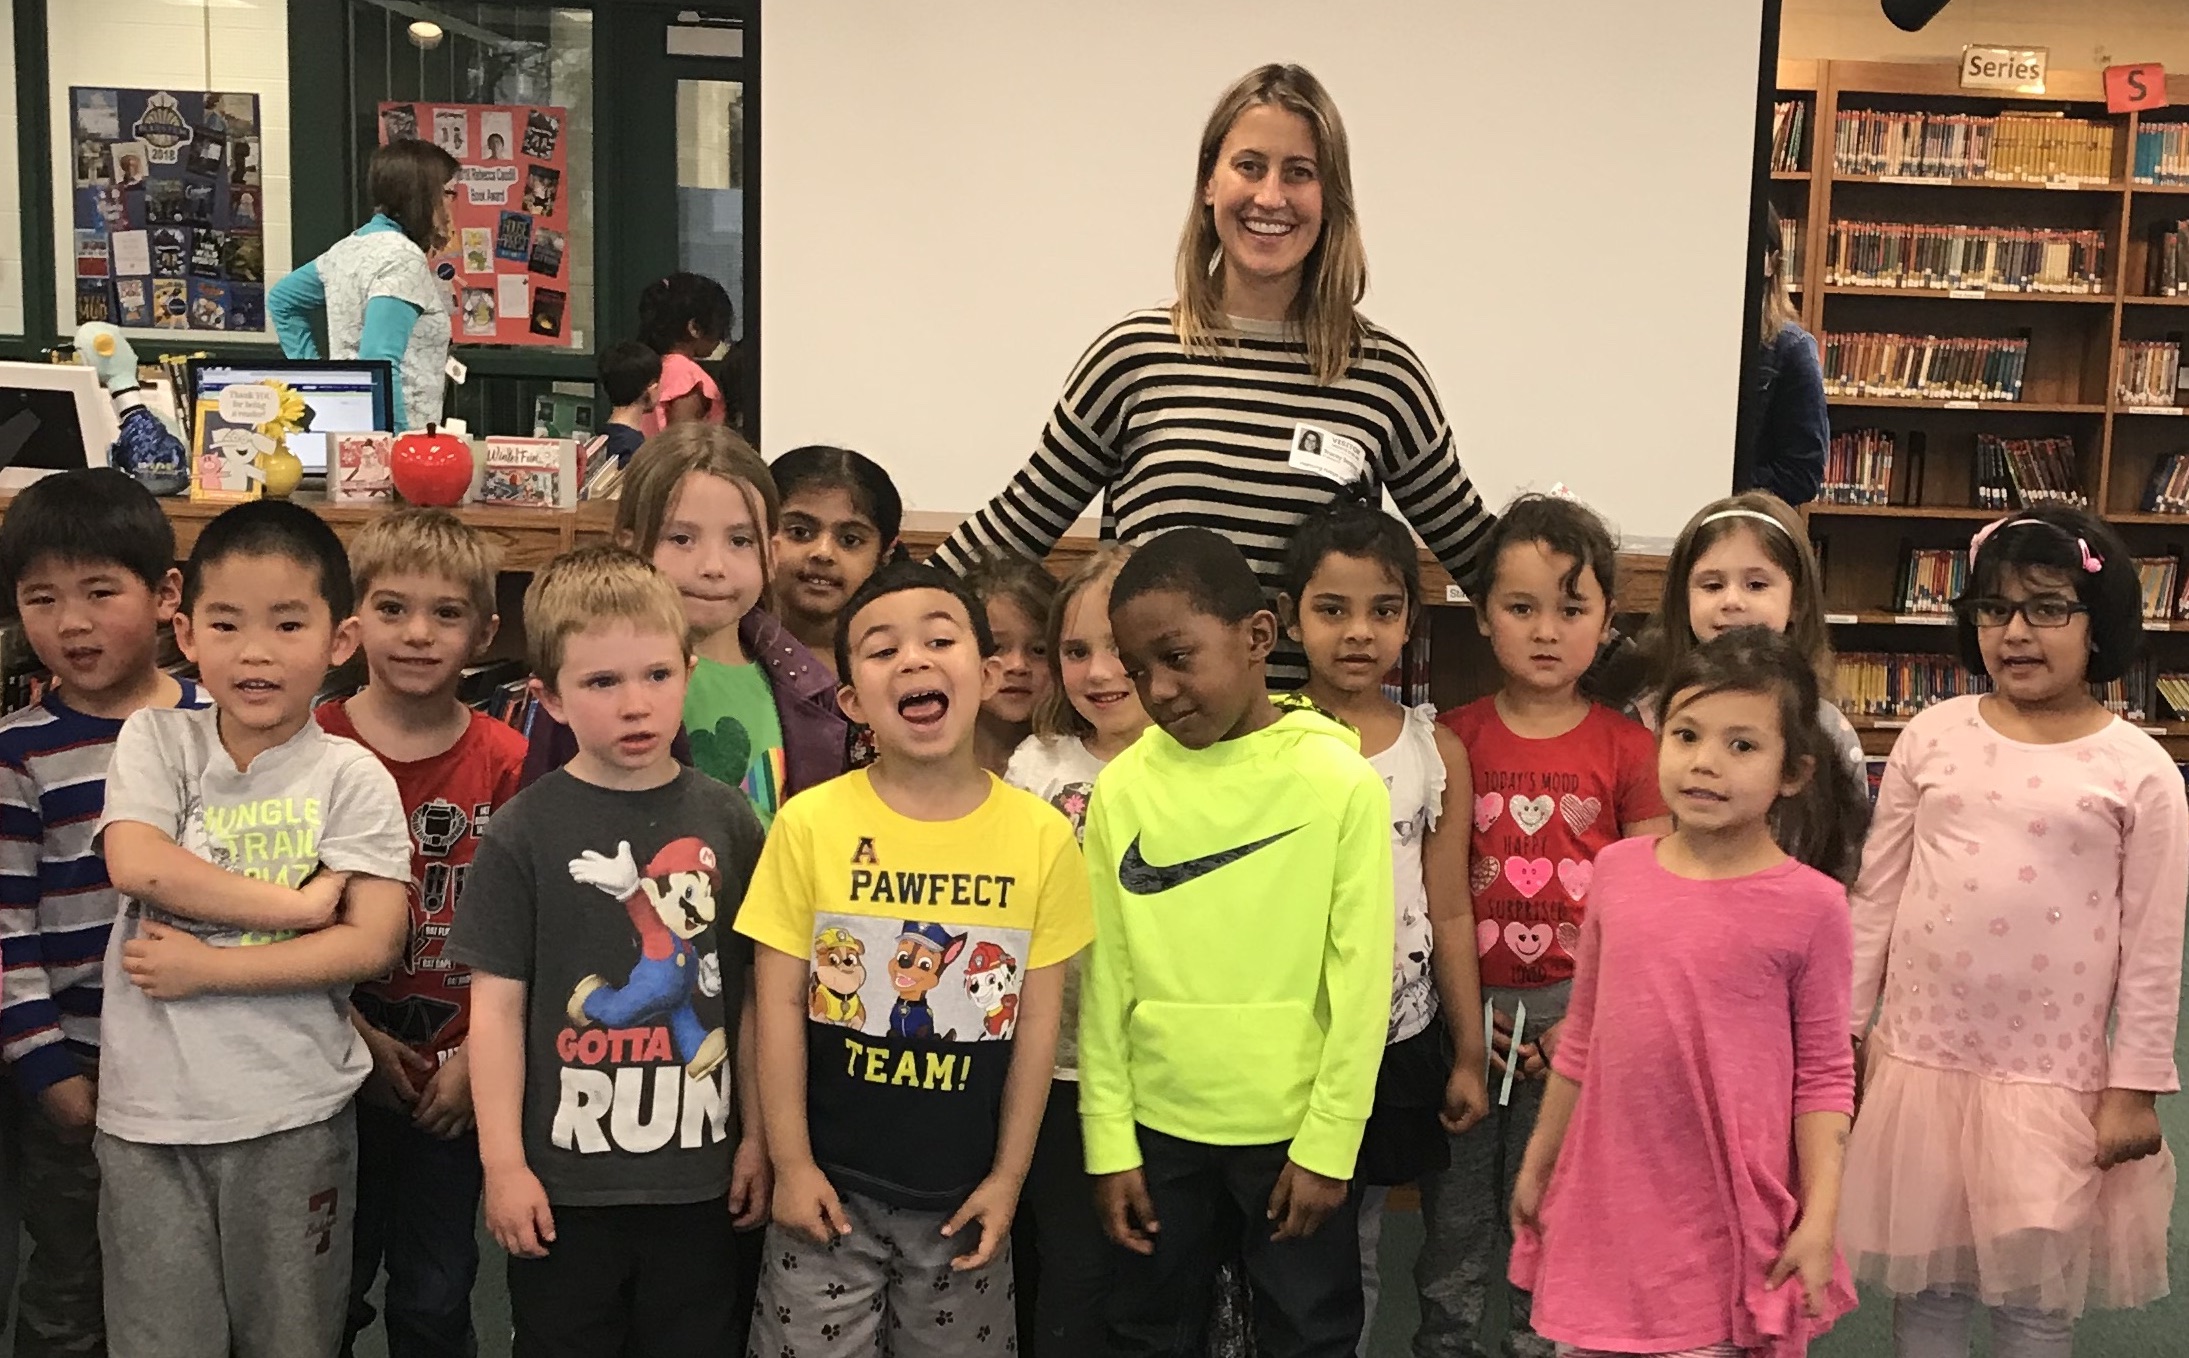 Tracey Hecht, author of The Nocturnals, is smiling in a classroom filled with children who are also posing for the picture.  